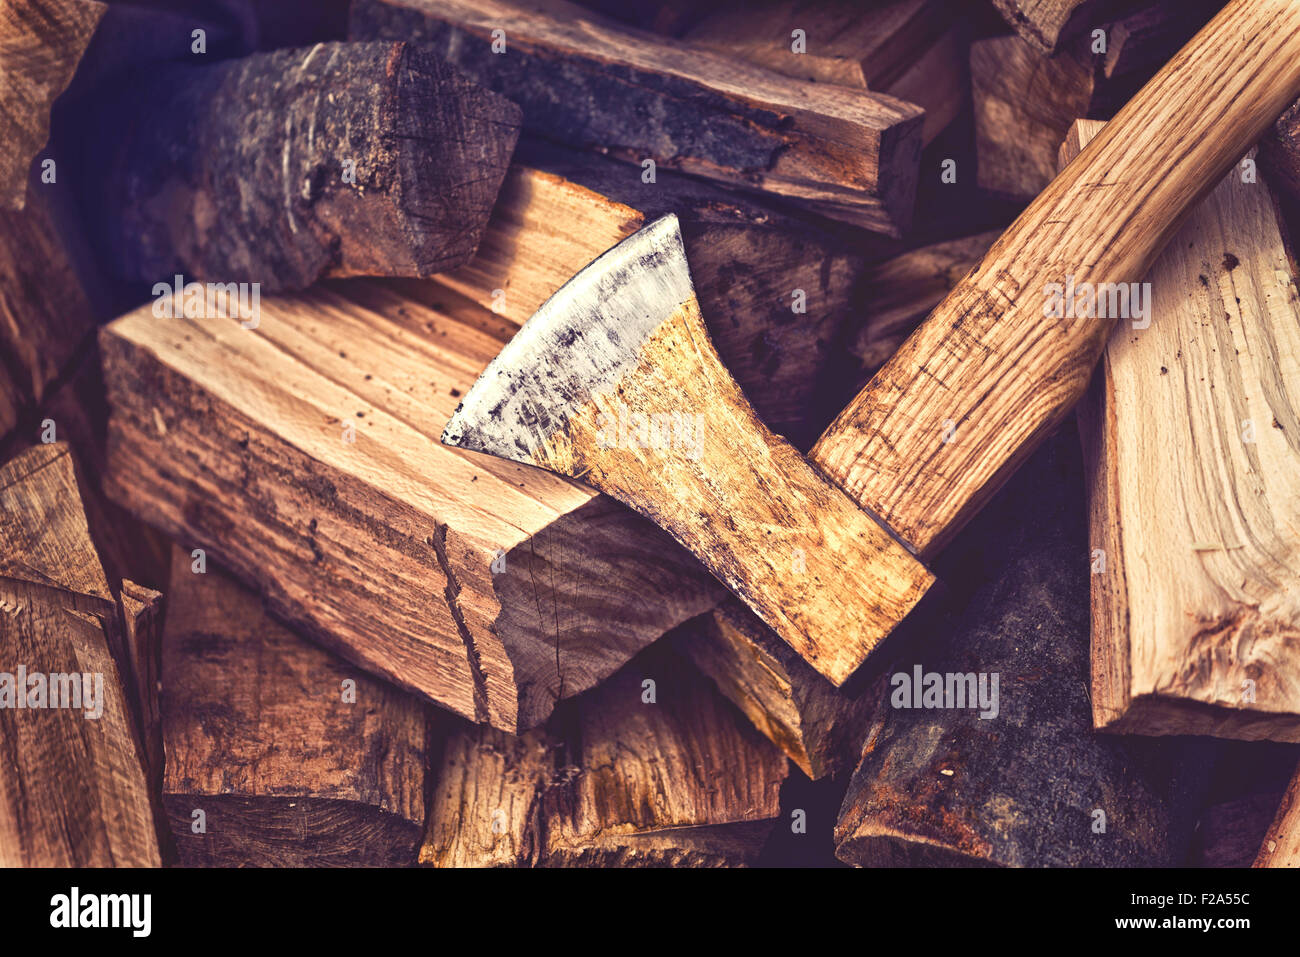 Hatchet Ax and Pile of Split Wood Logs for Fire, Selective Focus with Shallow Depth of Field, Toned Image. Stock Photo